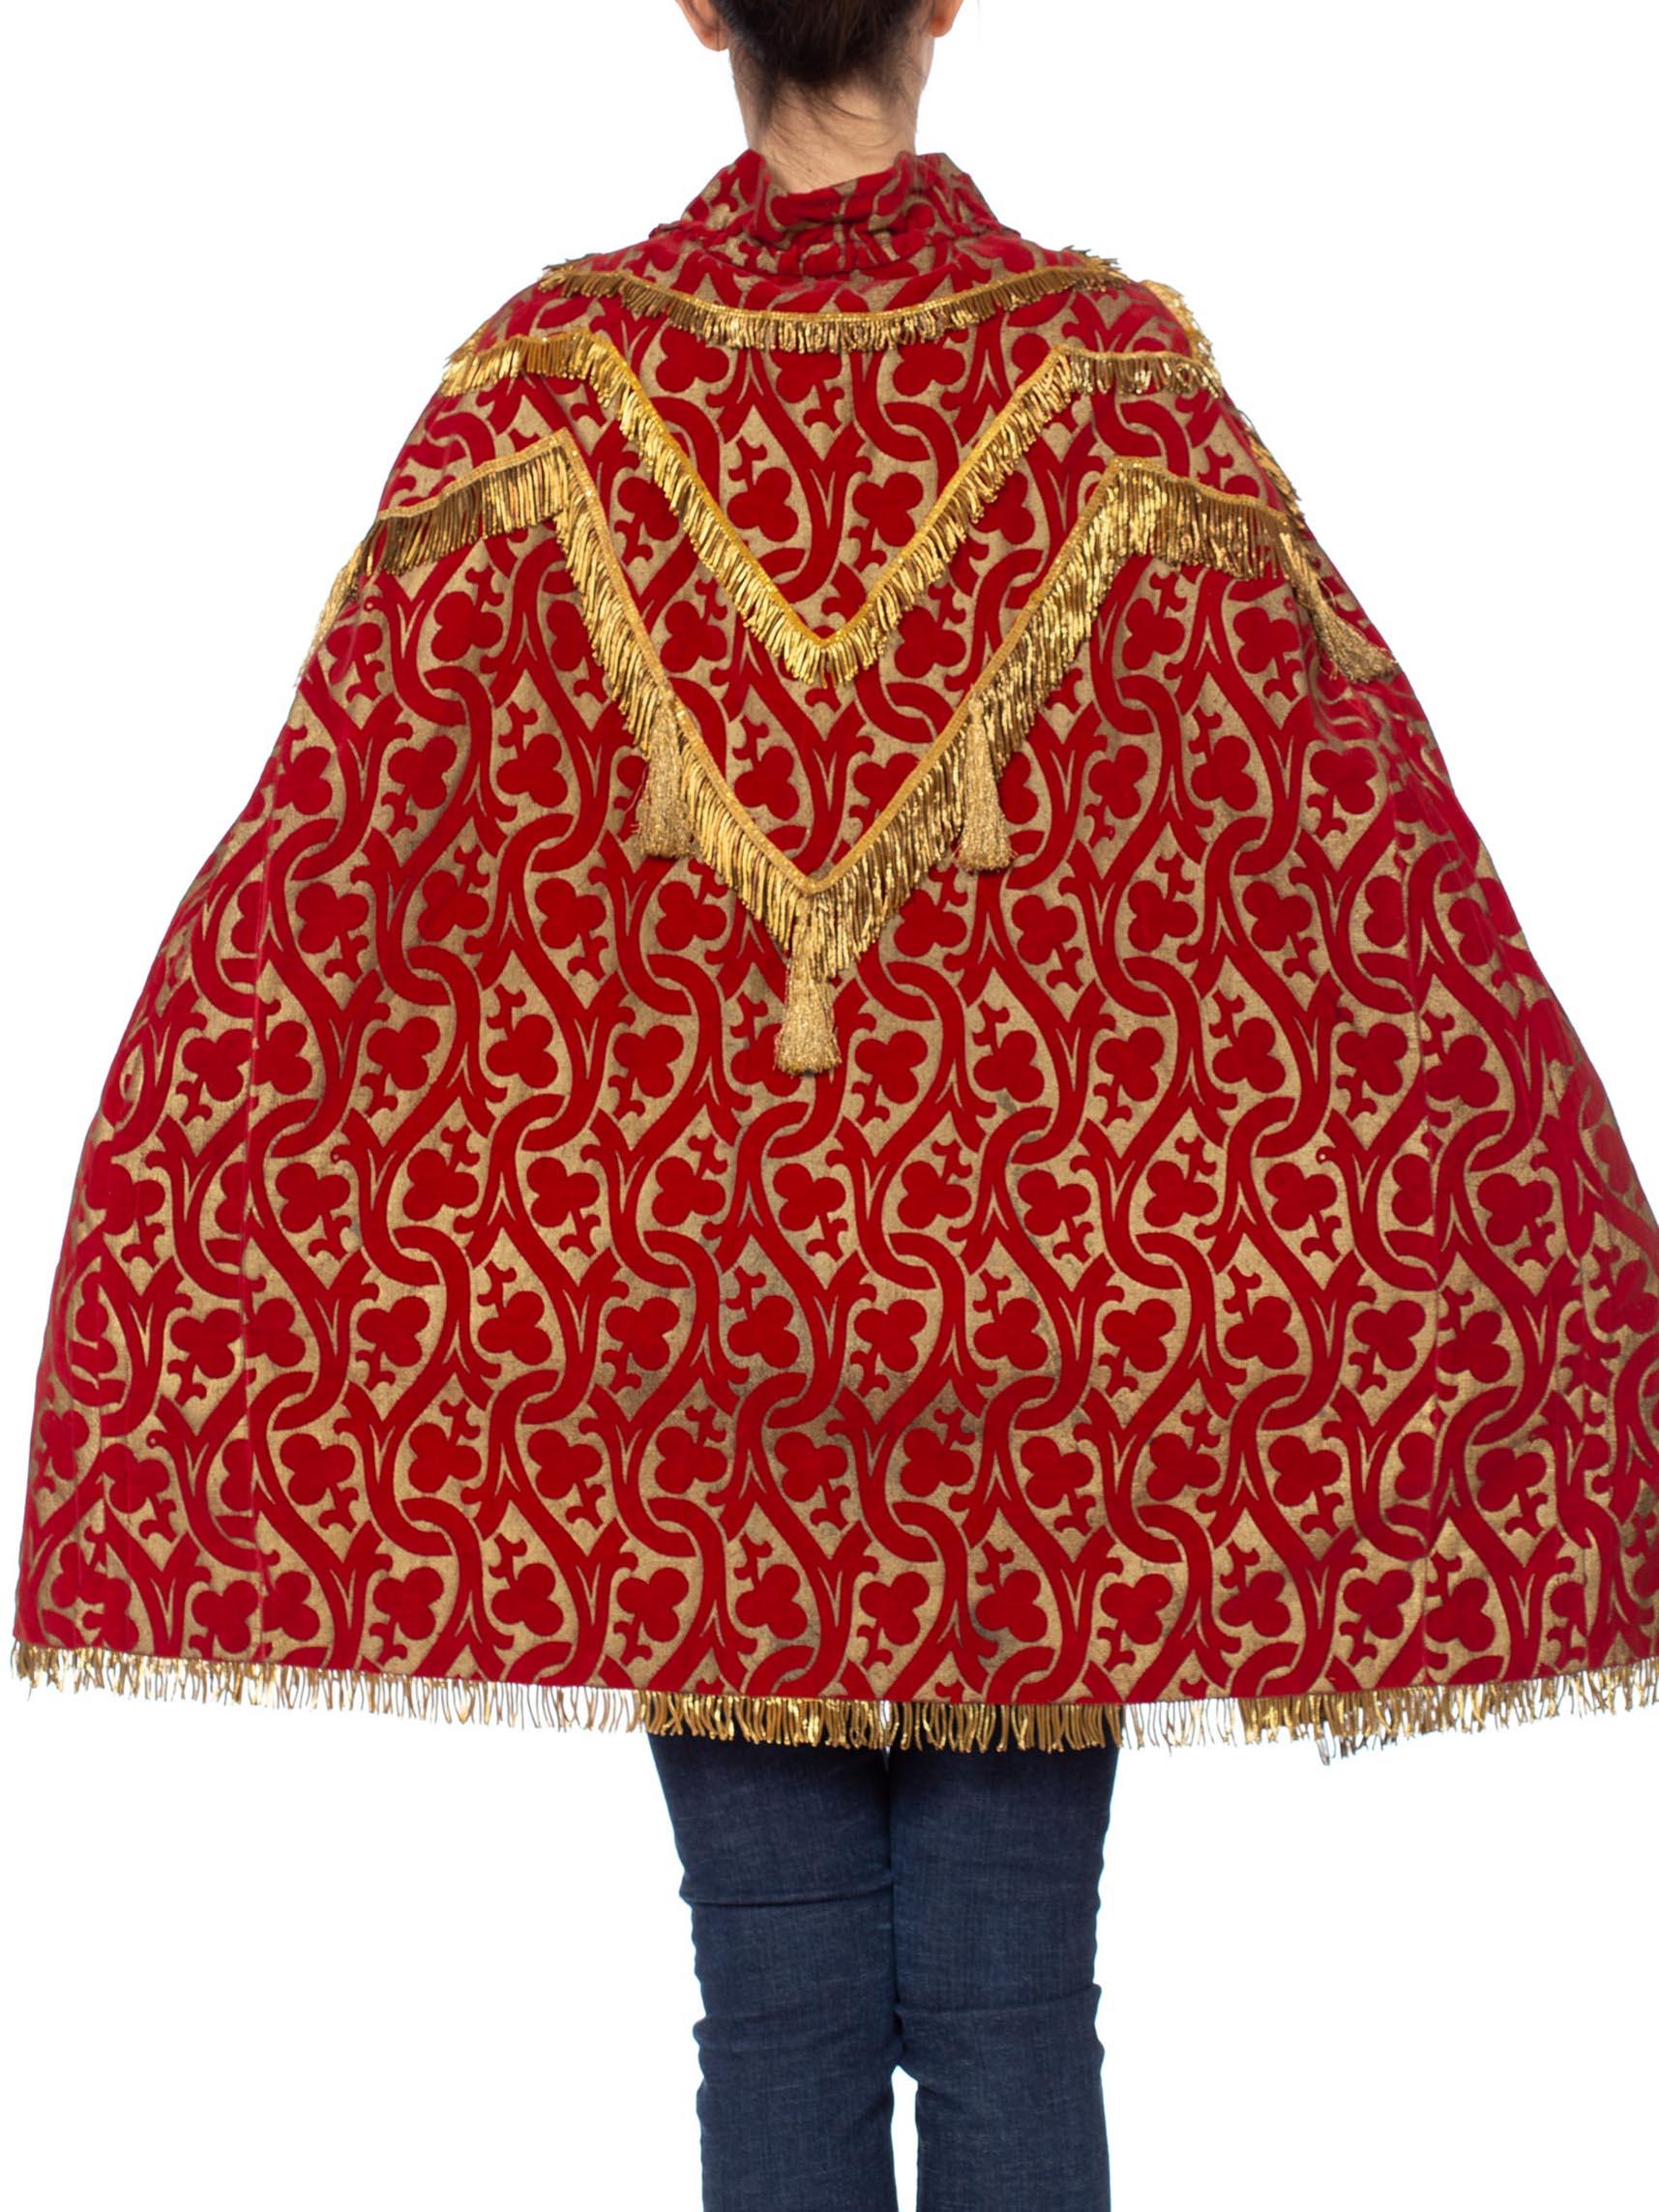 MORPHEW COLLECTION Red Metallic Printed Velvet Silk Lined Cape With Real Gold Bullion Fringe
MORPHEW COLLECTION is made entirely by hand in our NYC Ateliér of rare antique materials sourced from around the globe. Our sustainable vintage materials